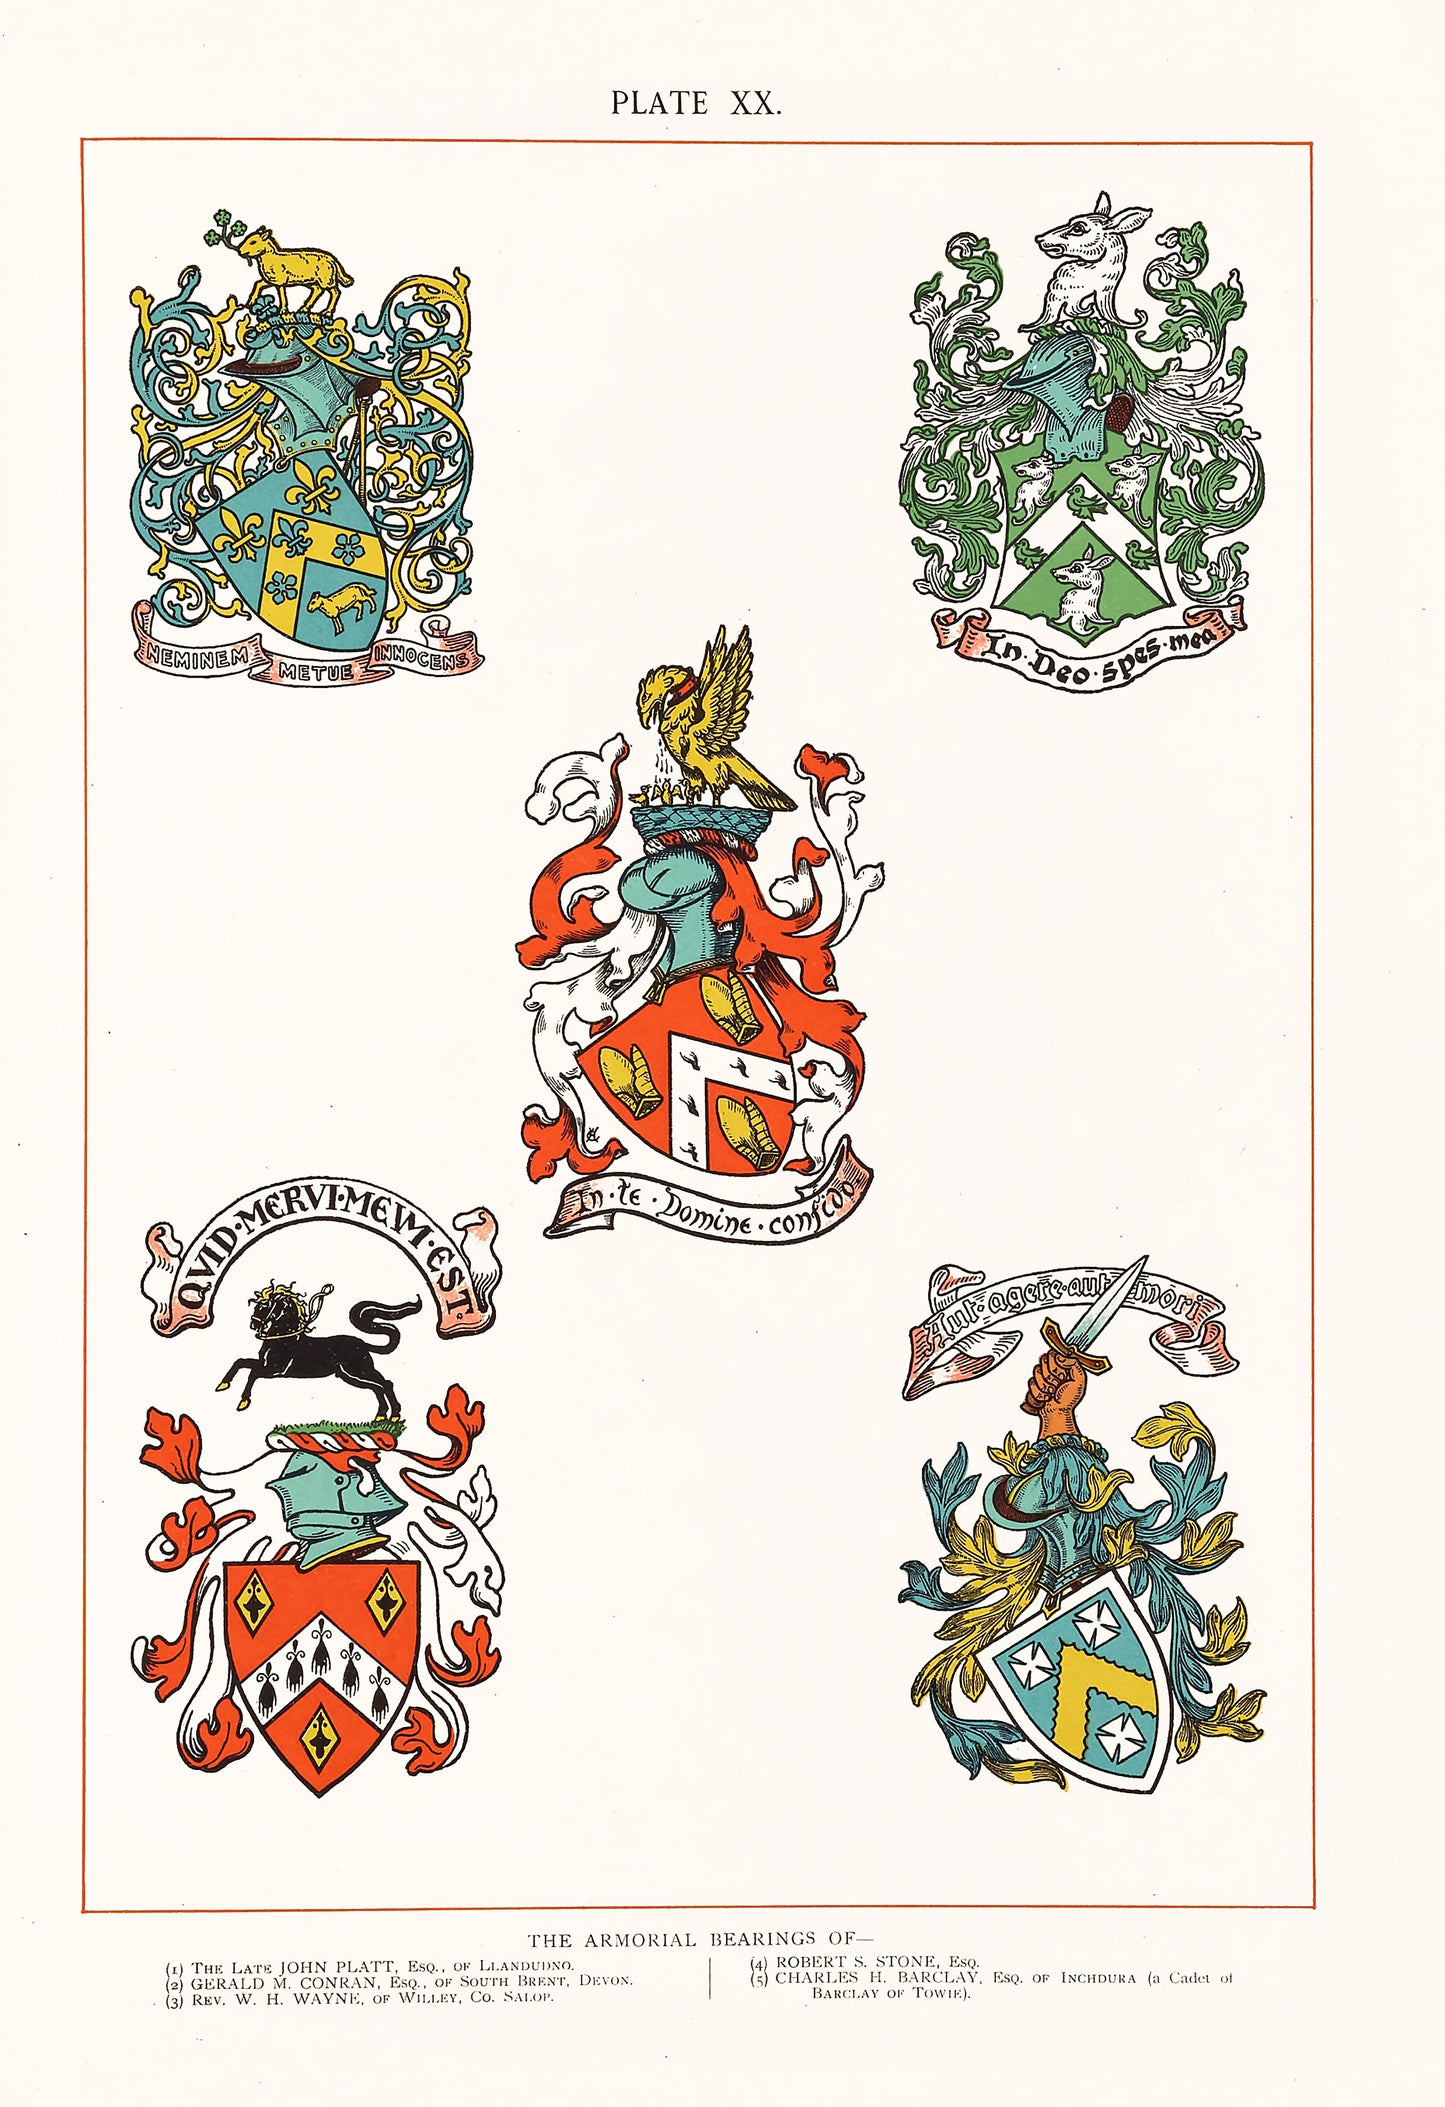 The Art of Heraldry Set 1 [54 Images]